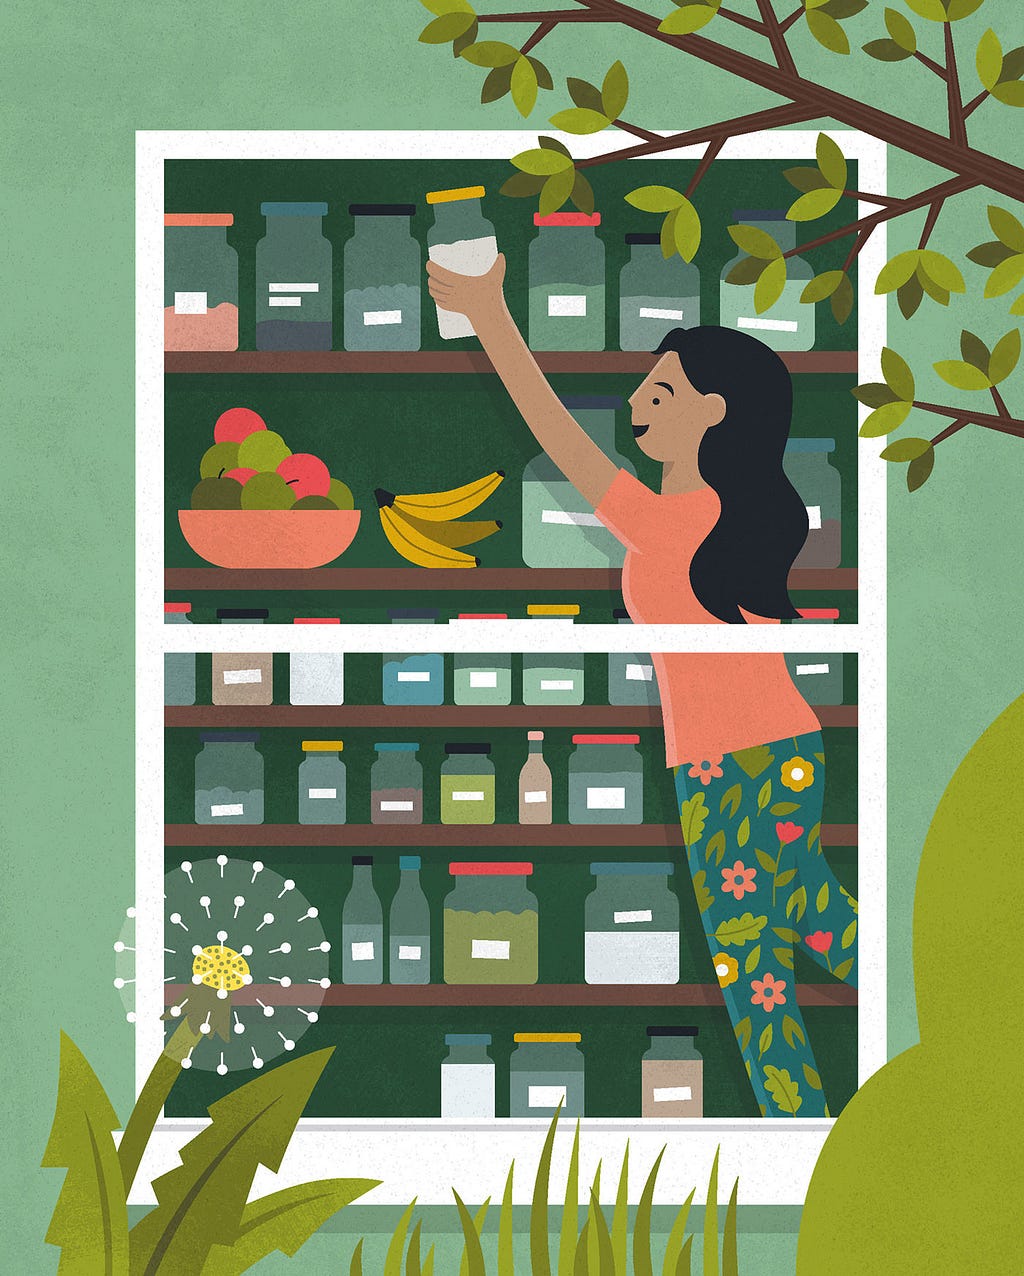 woman reaching for a jar in the pantry by James Gibbs (represented by NB Illustration)